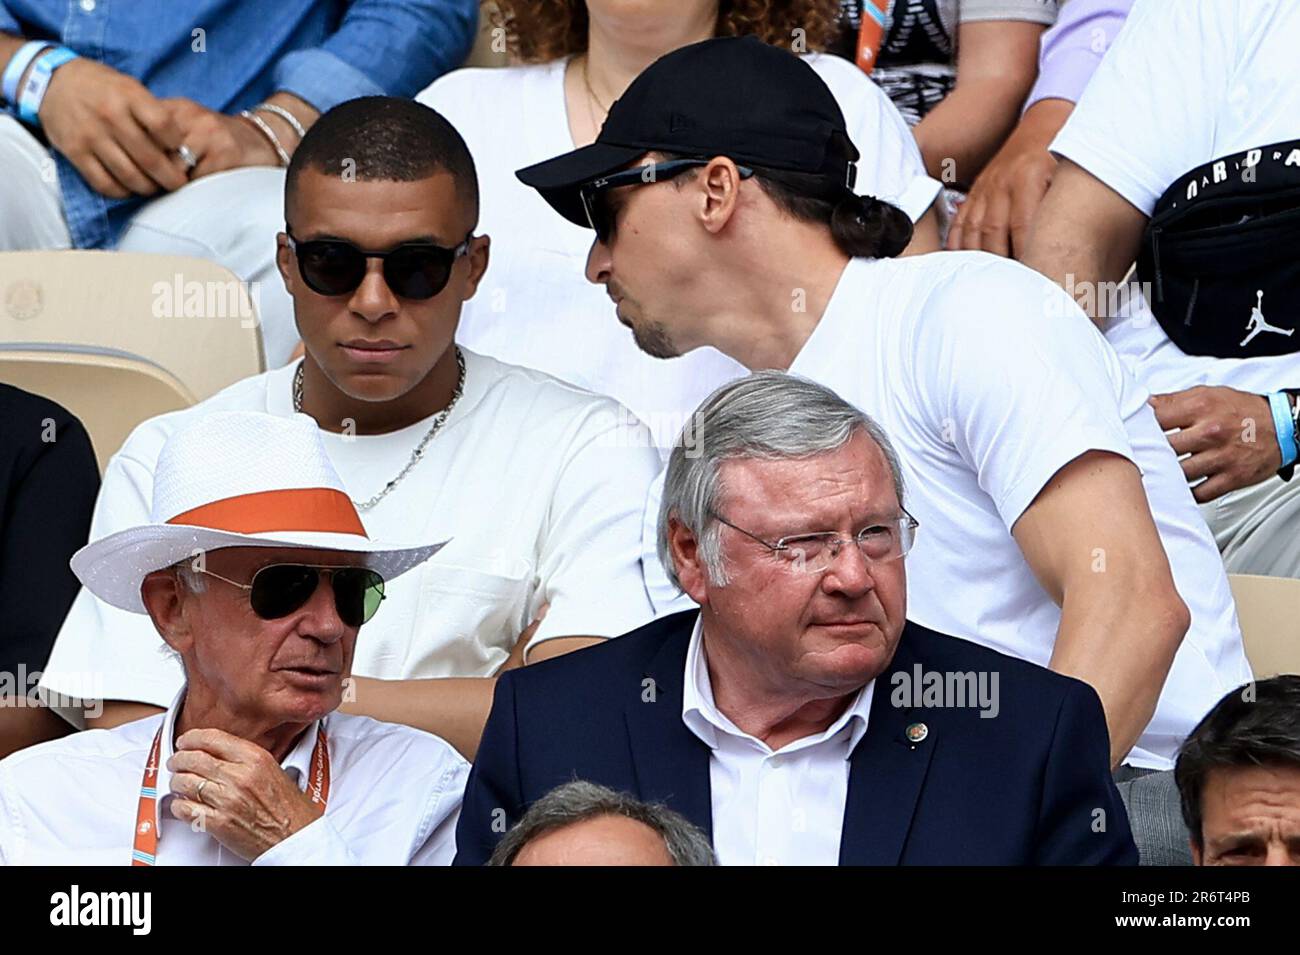 Swedish football player Zlatan Ibrahimovic, top right, speaks to French  football player Kylian Mbappe as they wait for the start of the final match  of the French Open tennis tournament between Serbia's